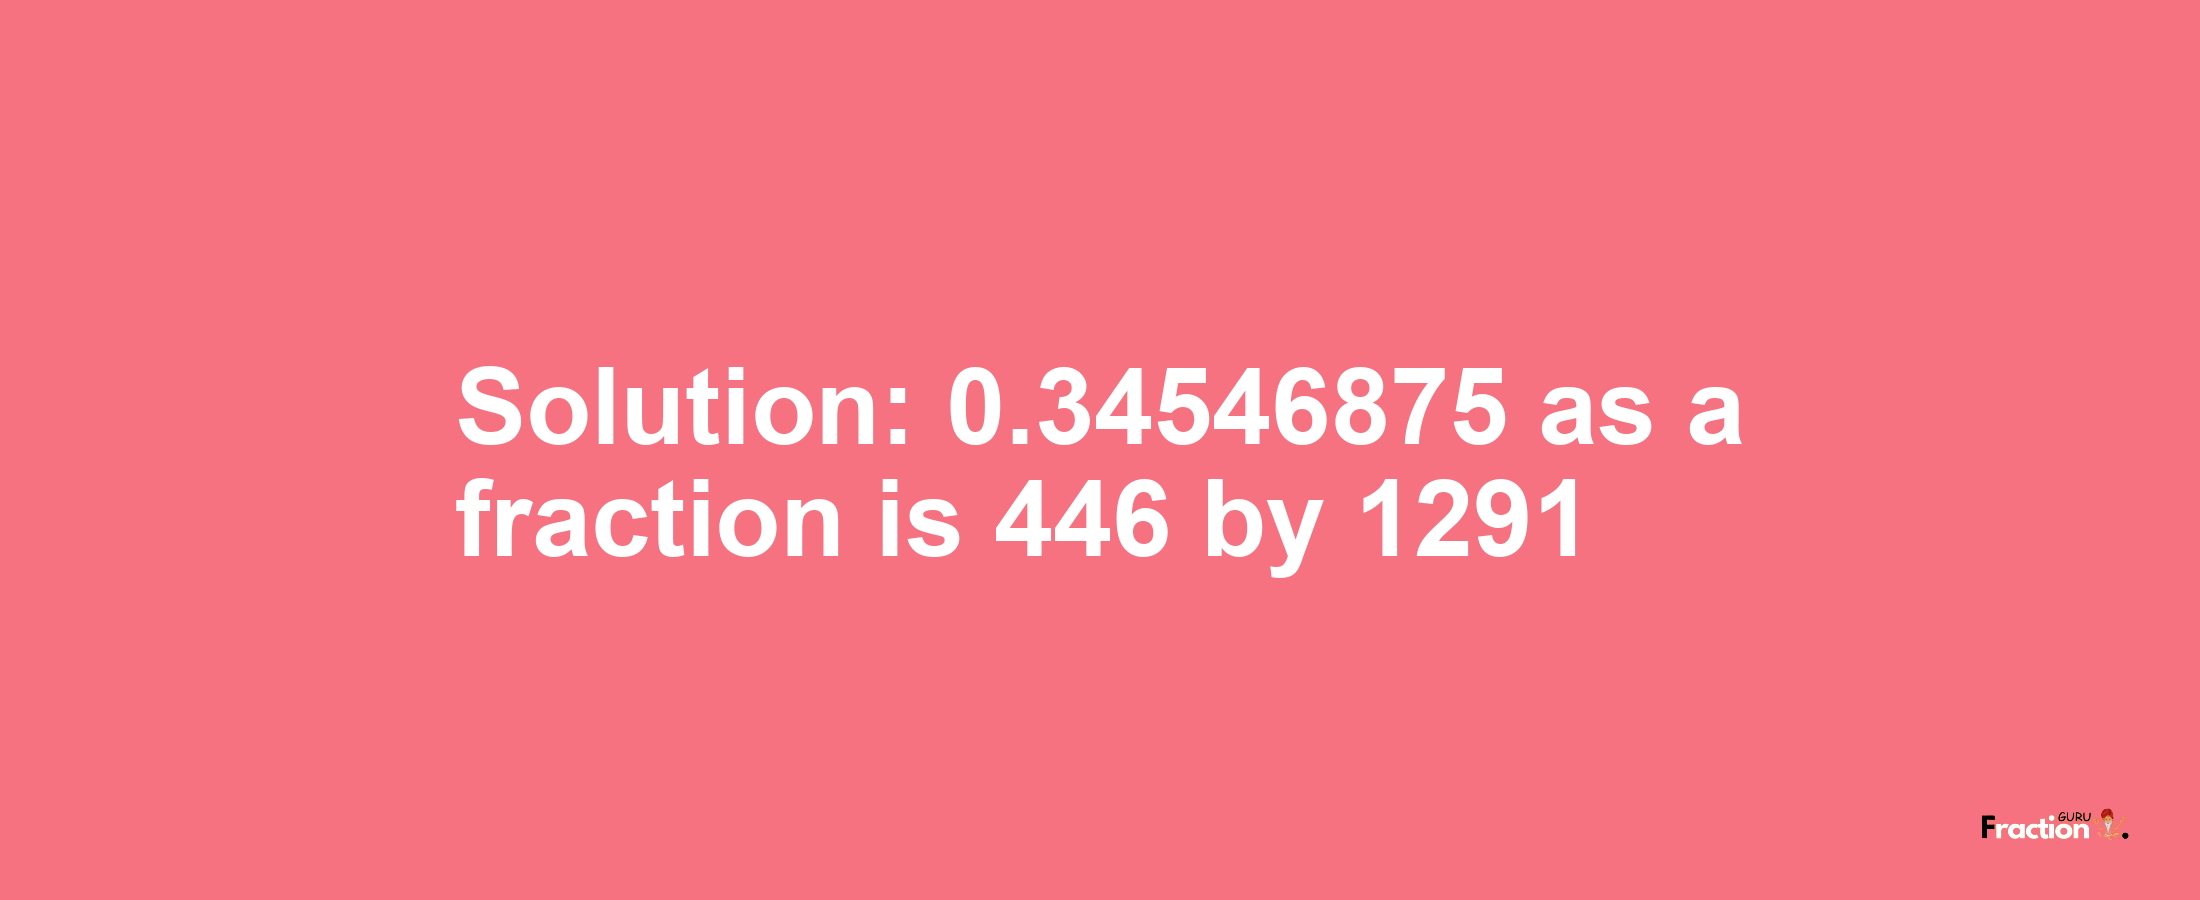 Solution:0.34546875 as a fraction is 446/1291